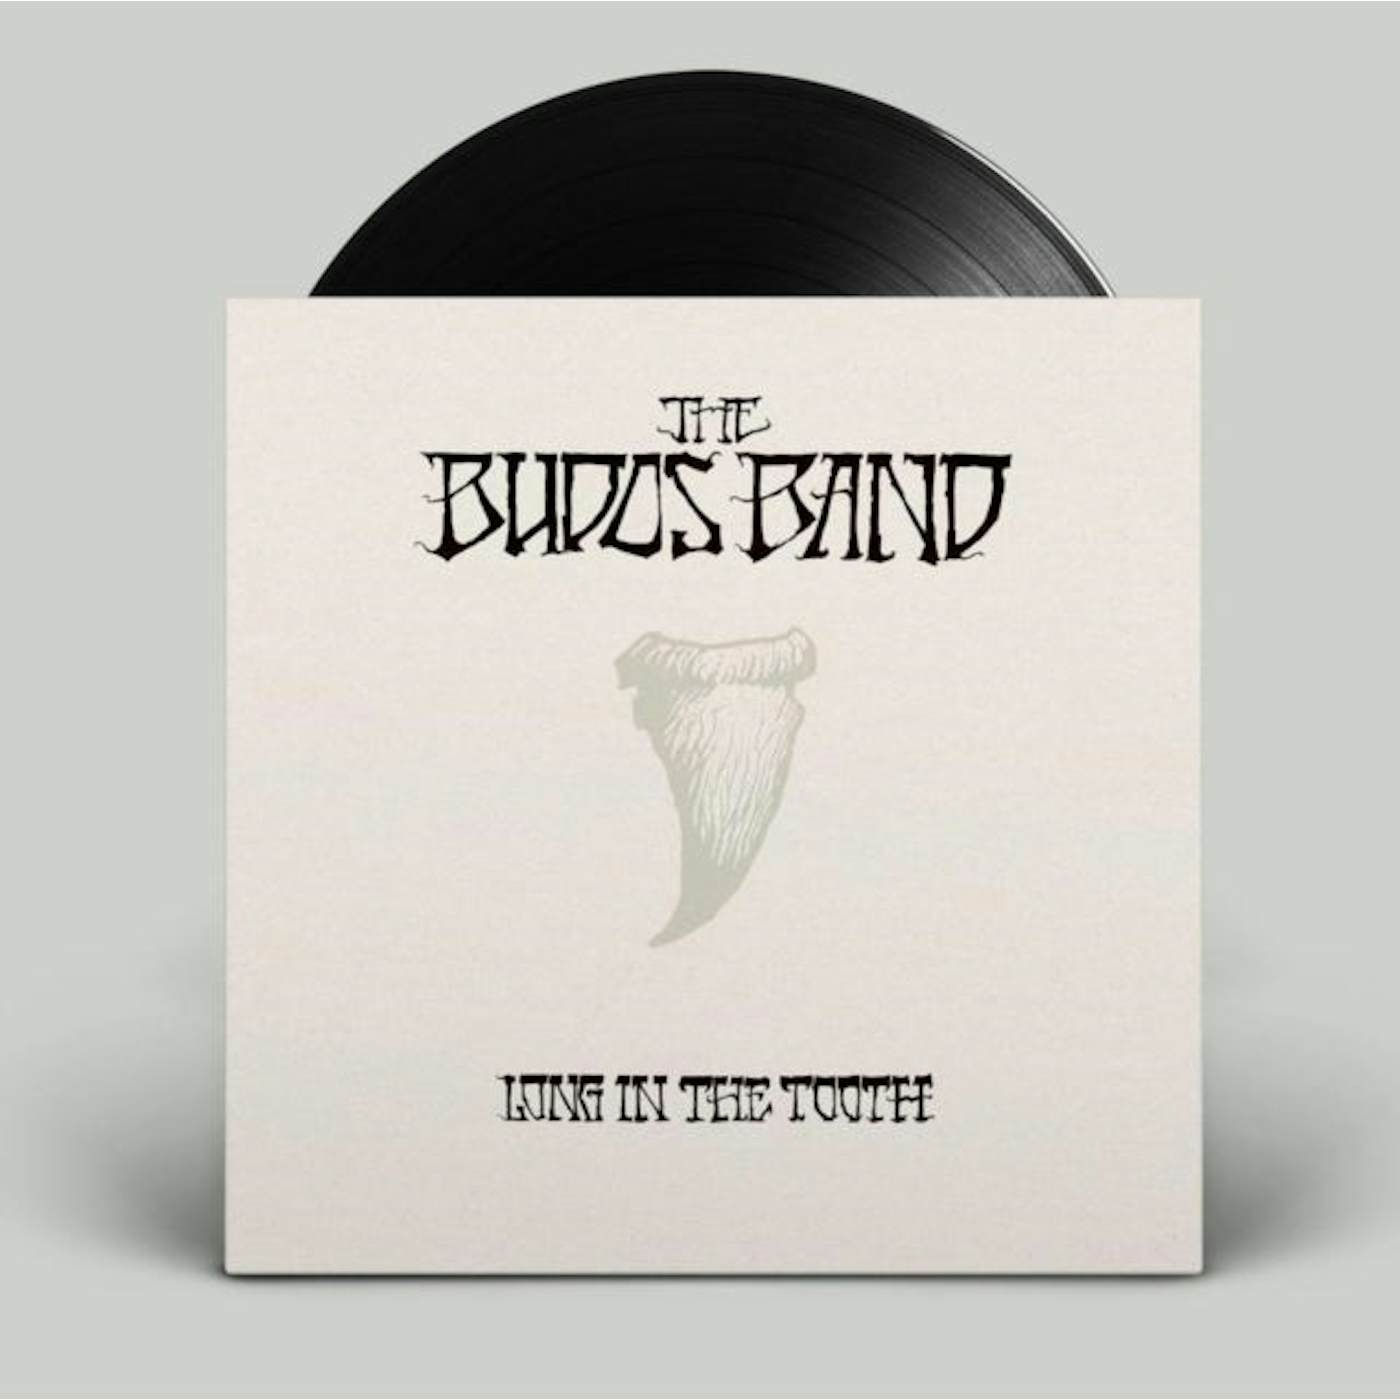 The Budos Band LP Vinyl Record - Long In The Tooth